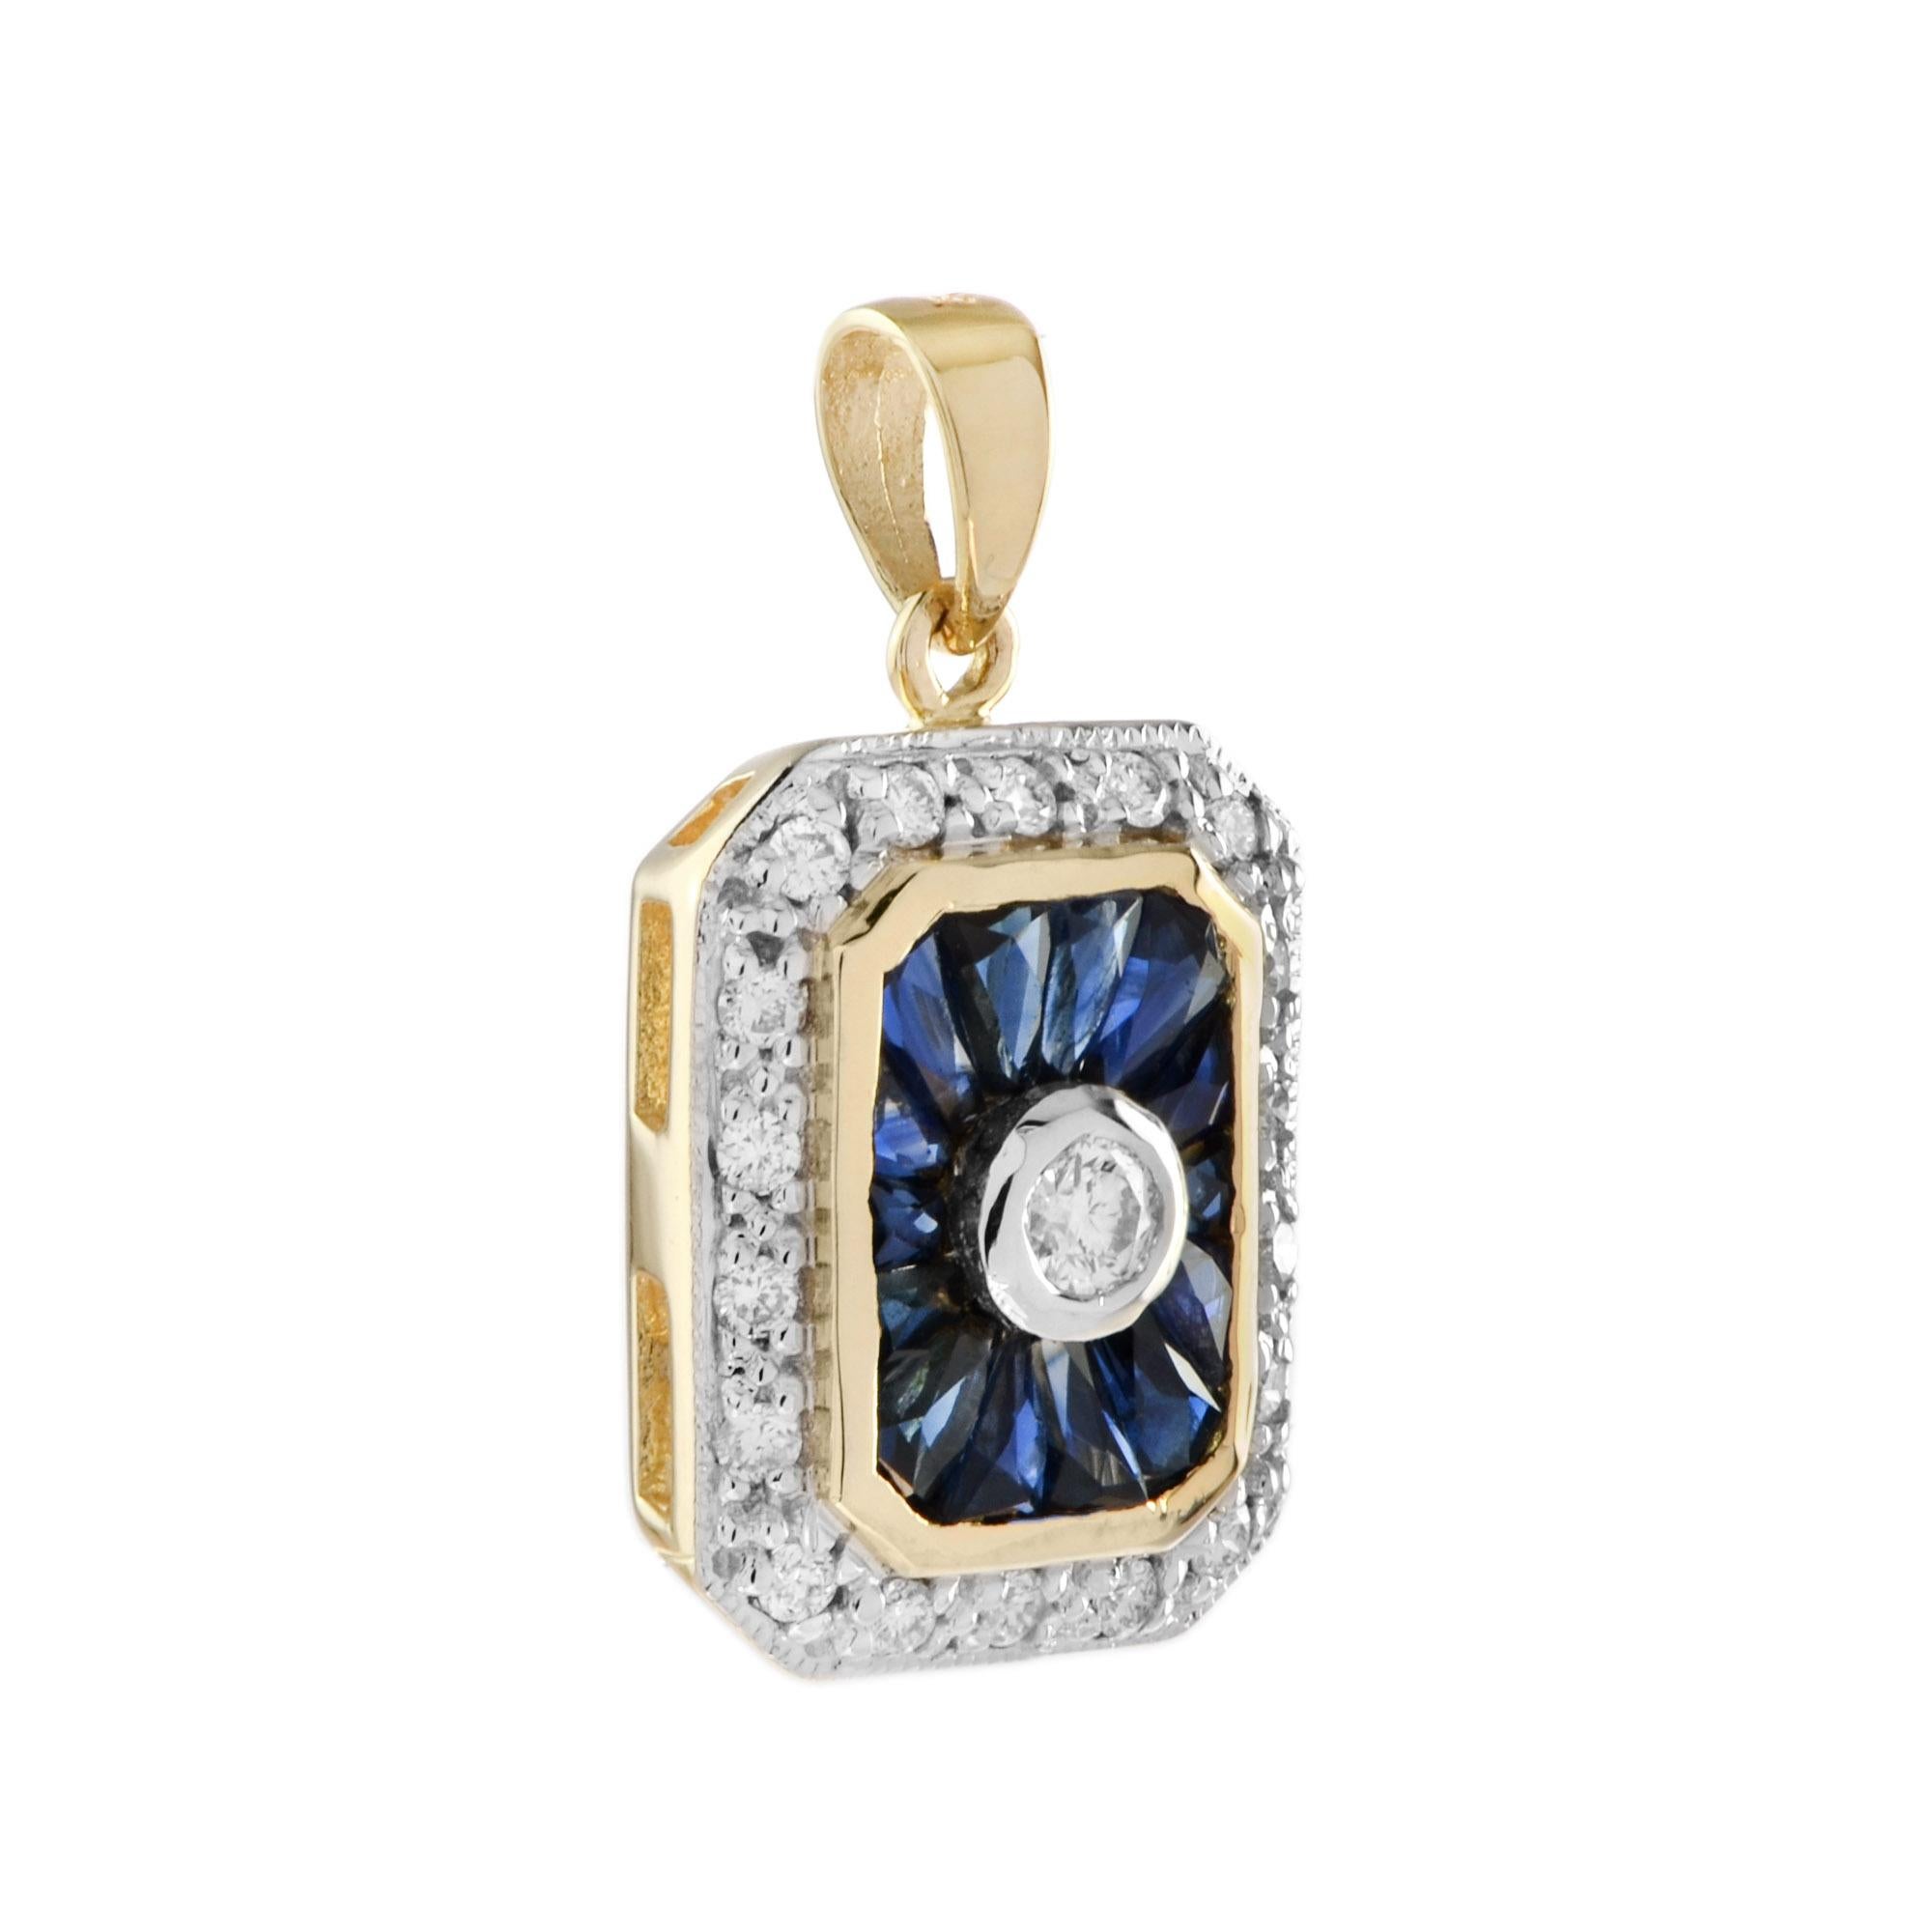 A stunning Art Deco inspired pendant in 14k two tone gold. A pendant with squared off edges in a traditional Art Deco style. To the center of the pendent sits a round brilliant cut diamond which are surrounded by a row of French cut sapphires.